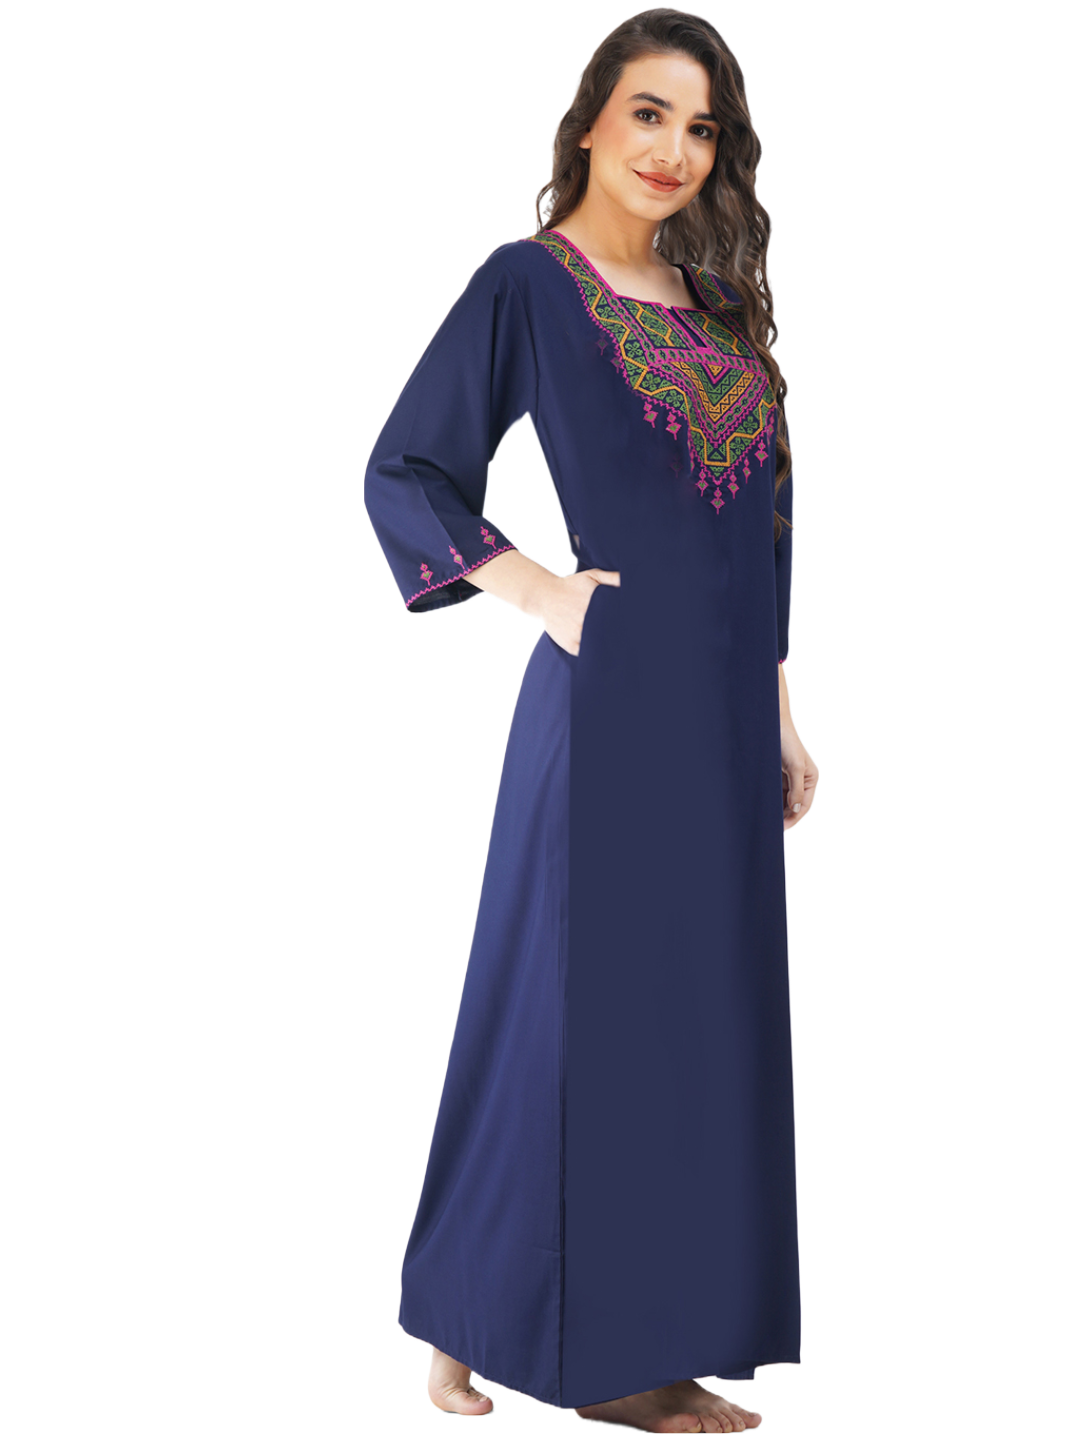 AR GROUPS OF LIFESTYLE's nightdress for girls and women| Fancy nightdress  for girls and women